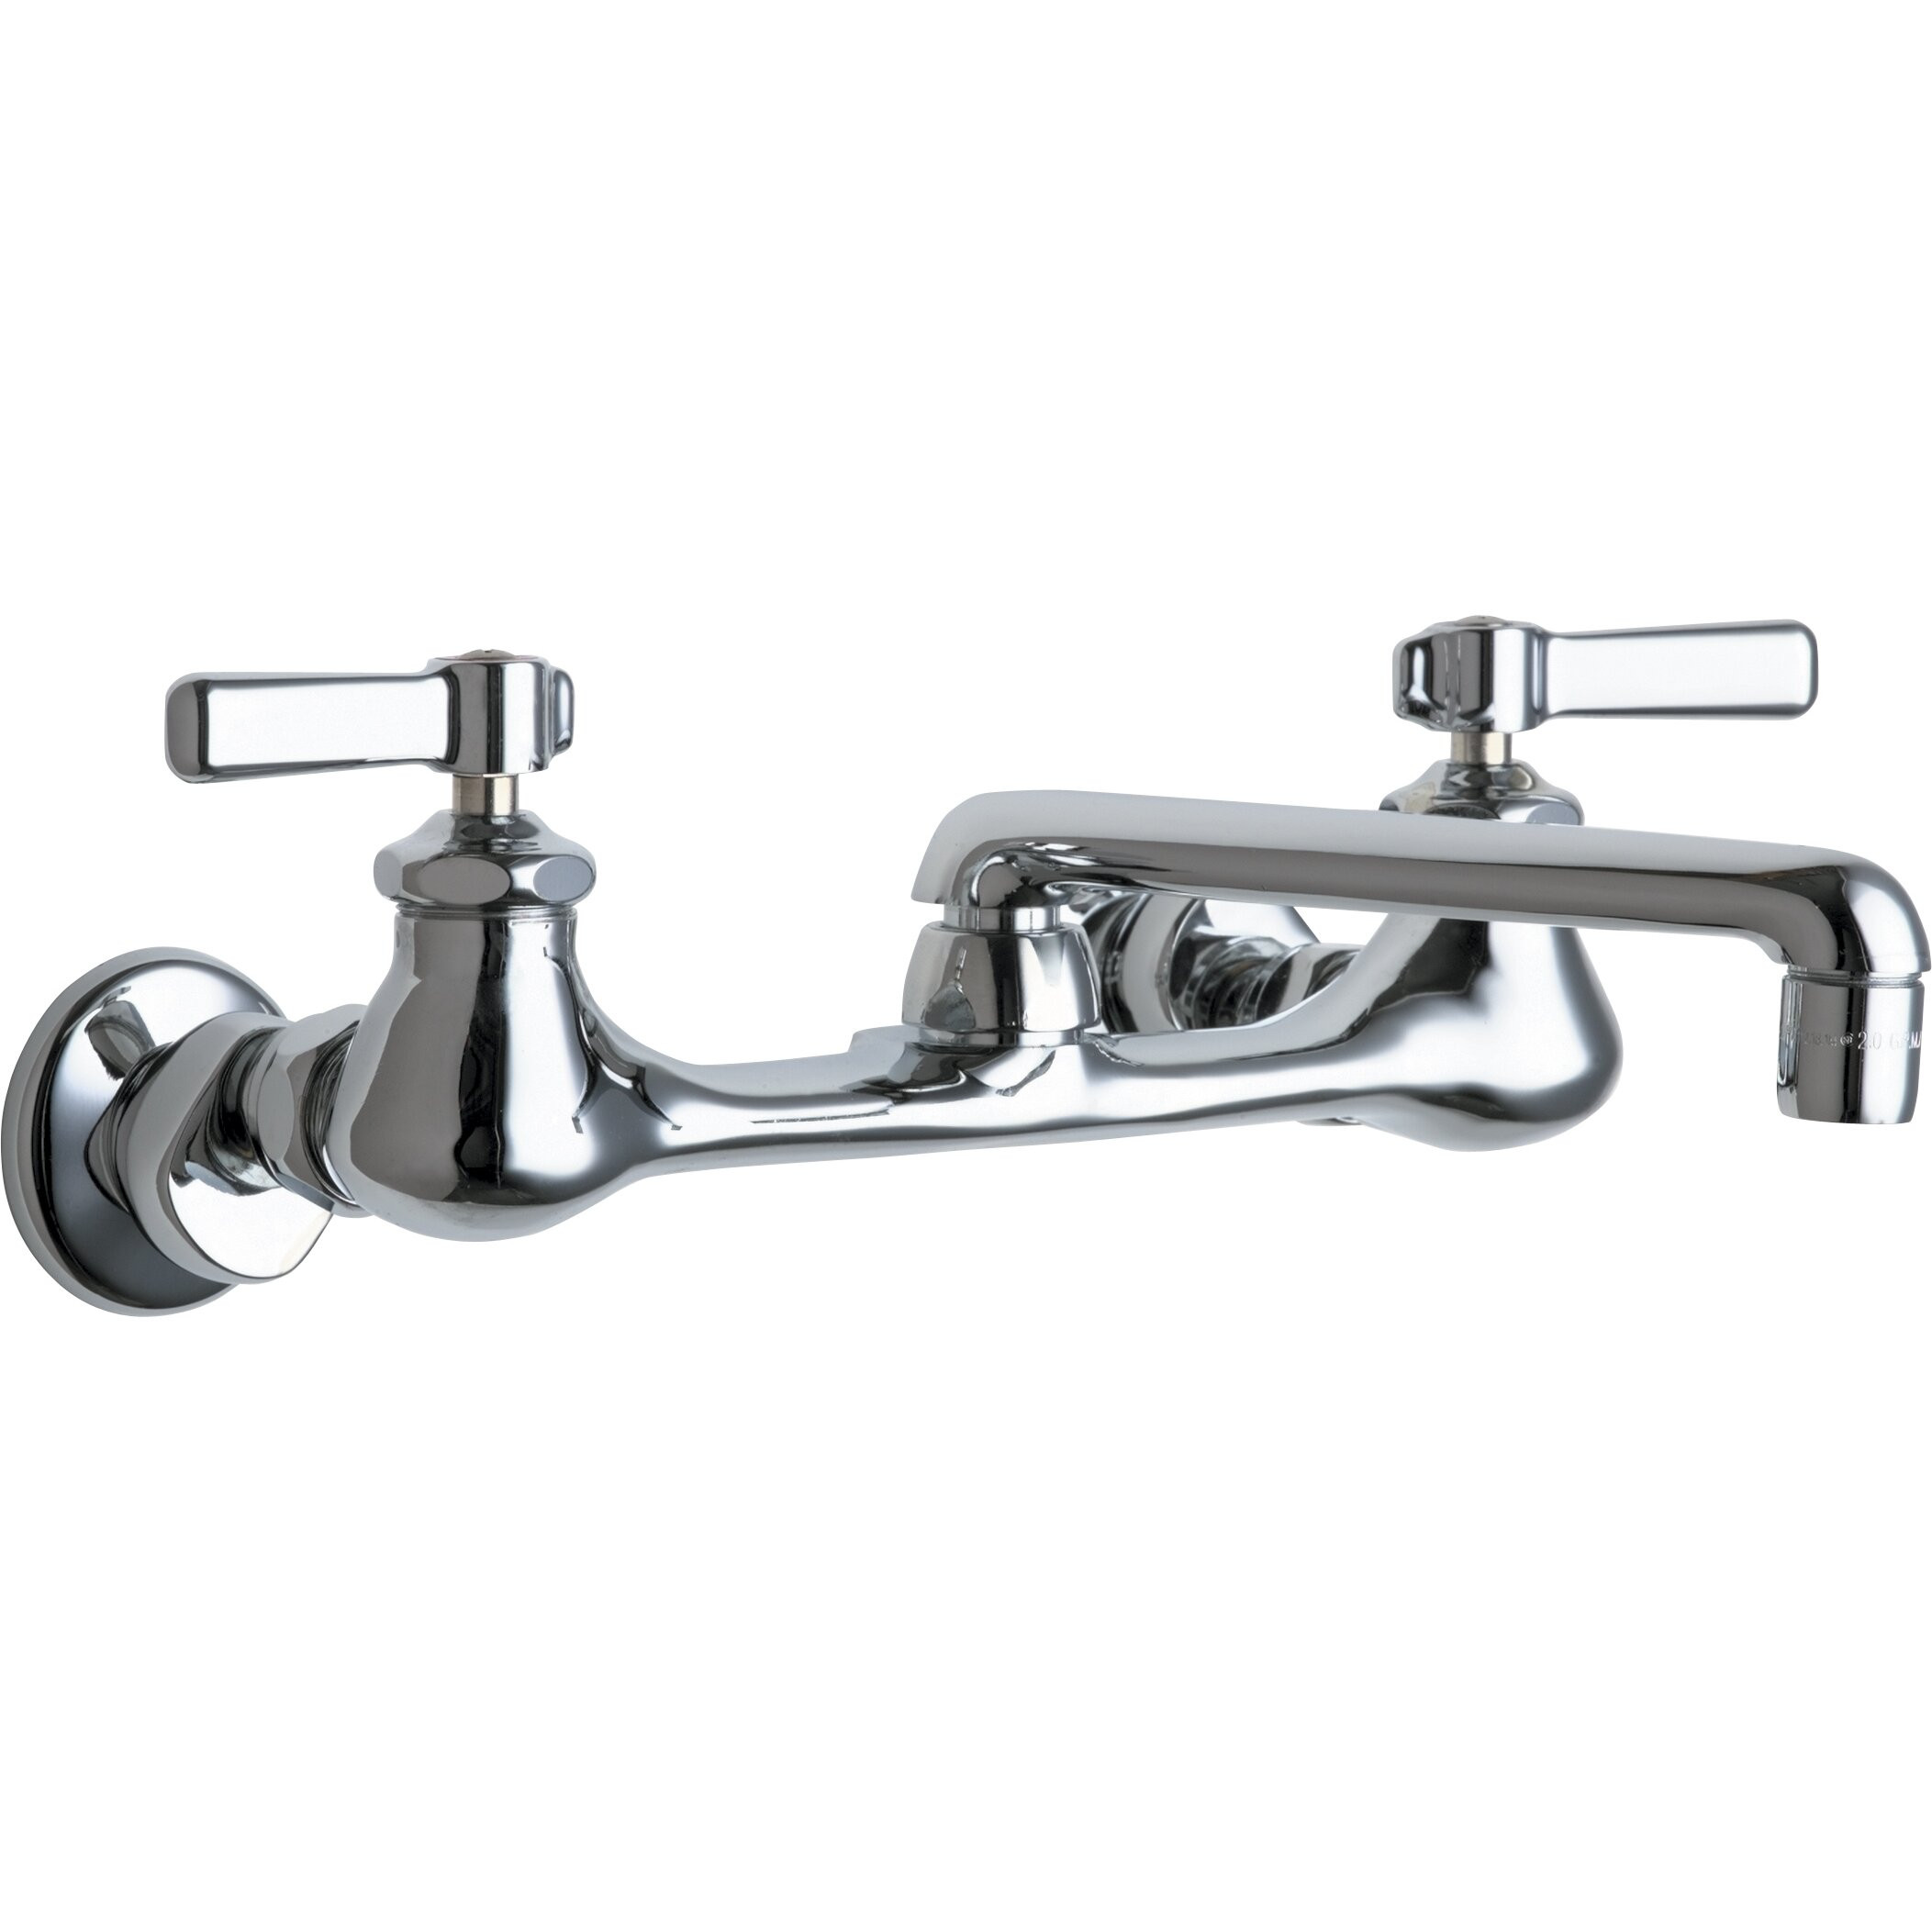 Kitchen Wall Mounted Faucets
 Chicago Faucets 540 Double Handle Wall Mount Bridge